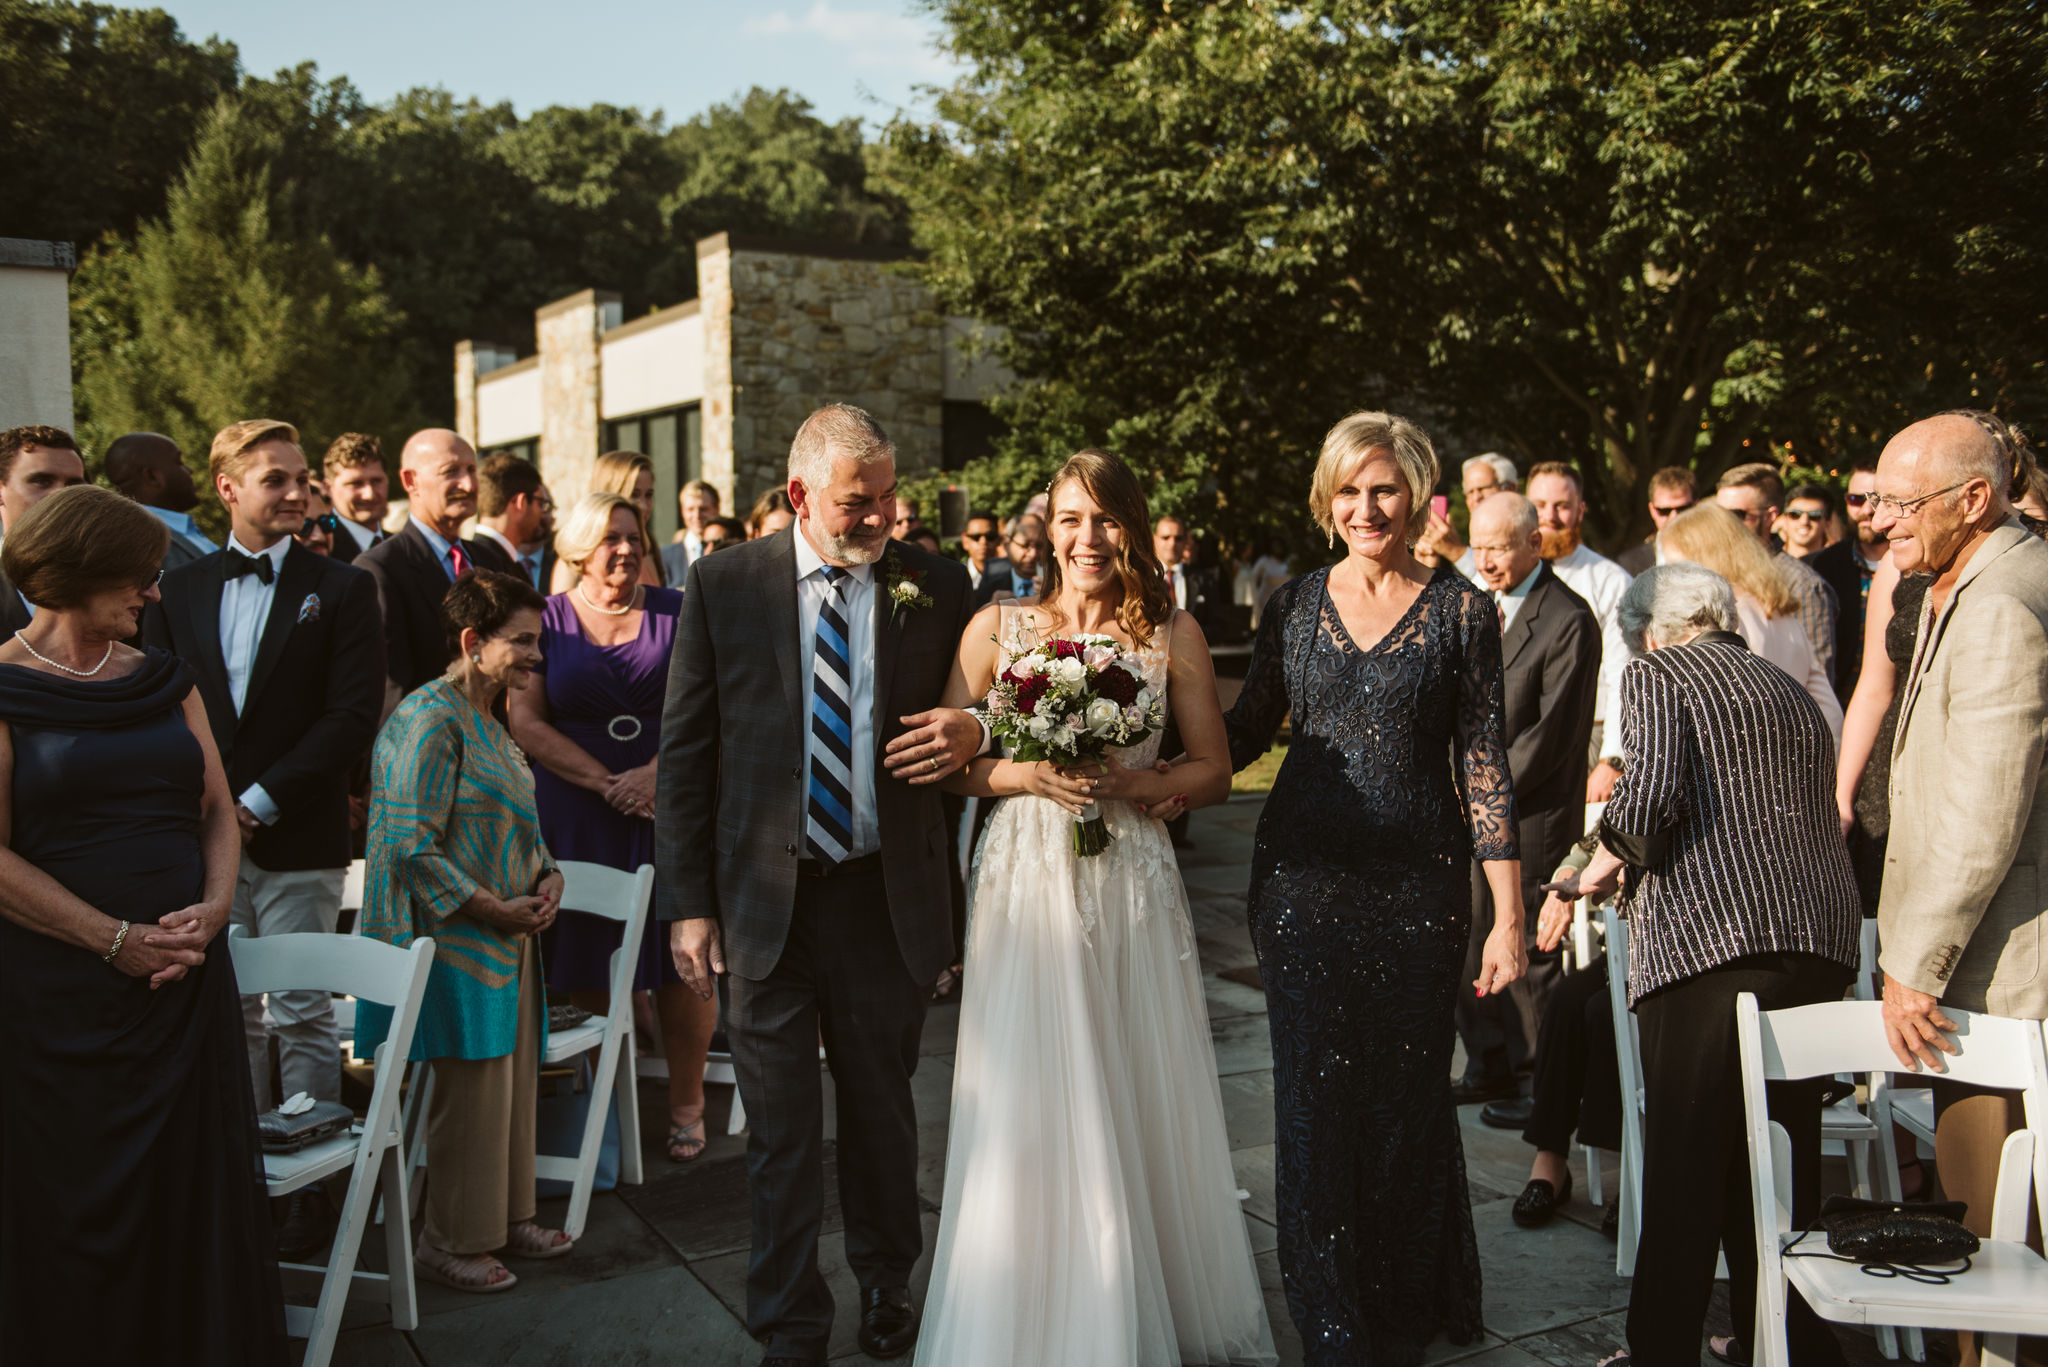  Phoenix Maryland, Baltimore Wedding Photographer, Eagle’s Nest Country Club, Classic, Romantic, Bride Walking Down Aisle with Mother and Father of the Bride, BHLDN Dress, Dundalk Florist 